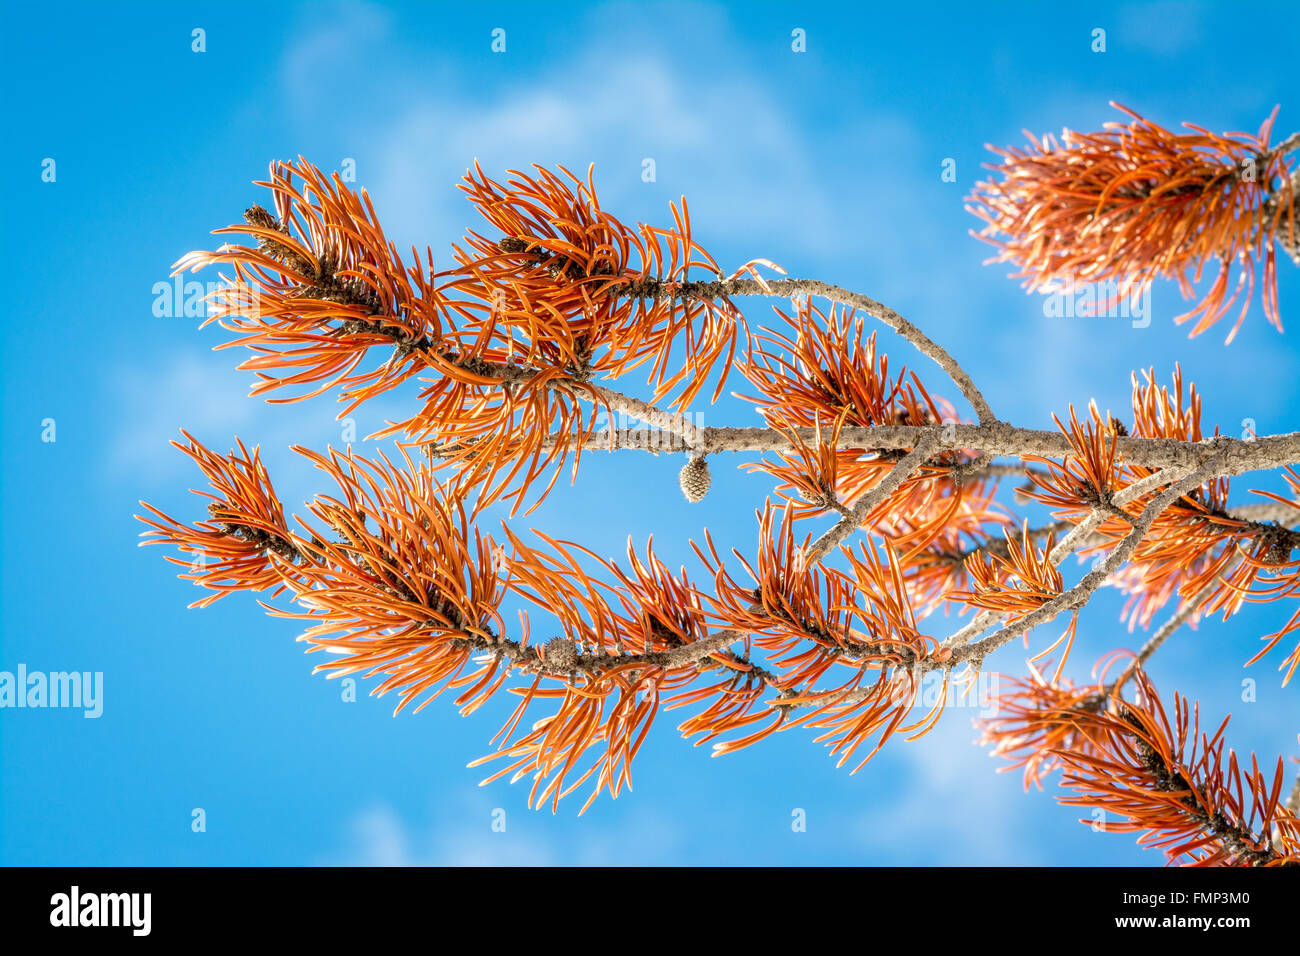 Needles on a dying pine tree in the winter Stock Photo